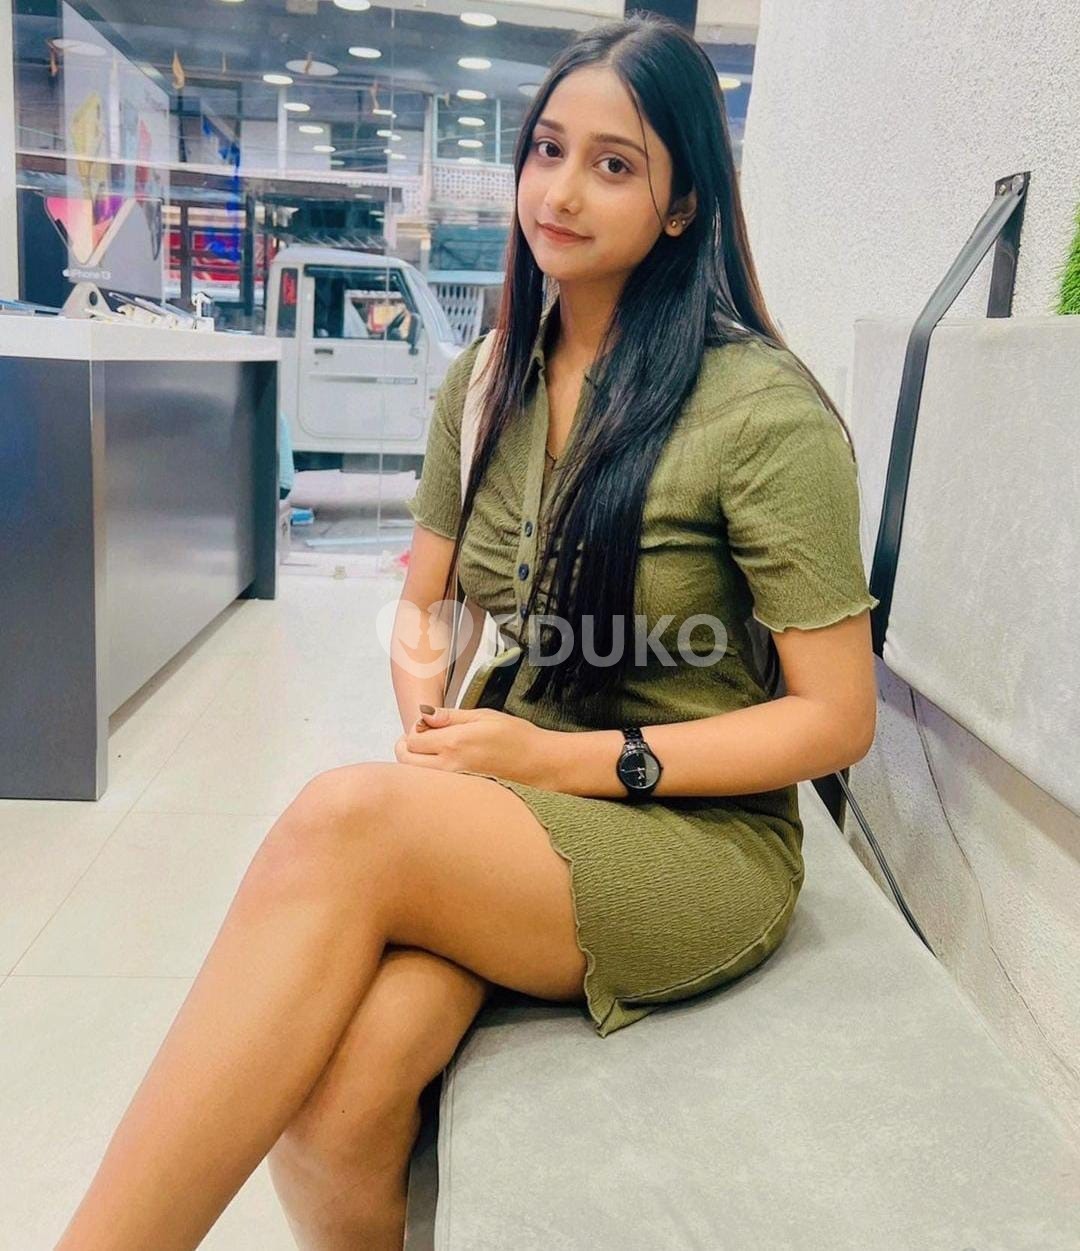 Anisha ➡️ ooty 🔝 vip independent escorts call girls sarvices full safe and secure 24 hours available